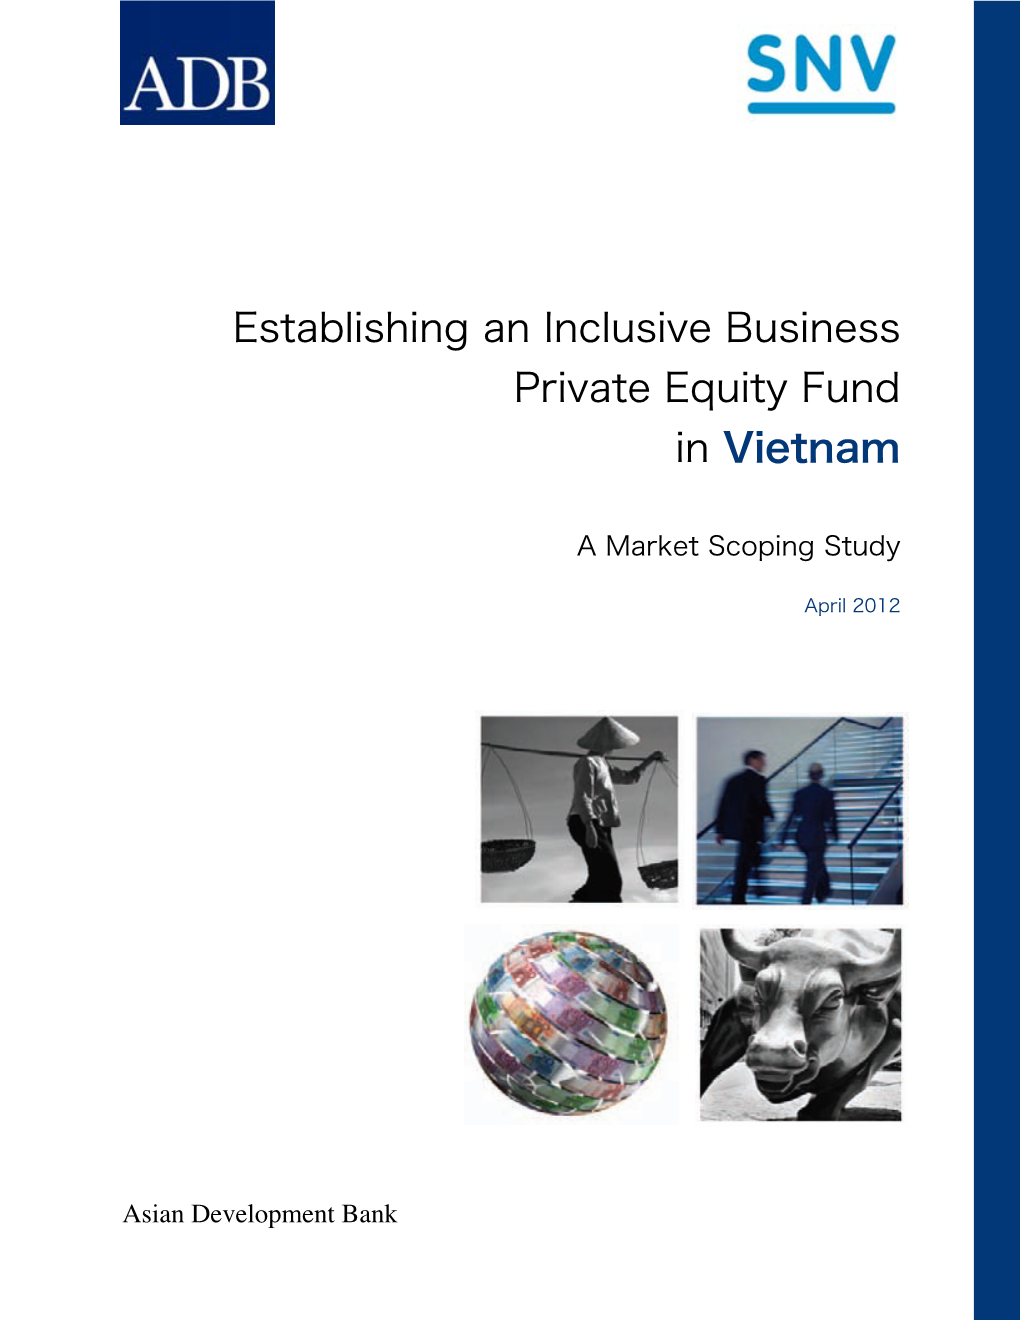 Establishing an Inclusive Business Private Equity Fund in Vietnam: a Market Scoping Study